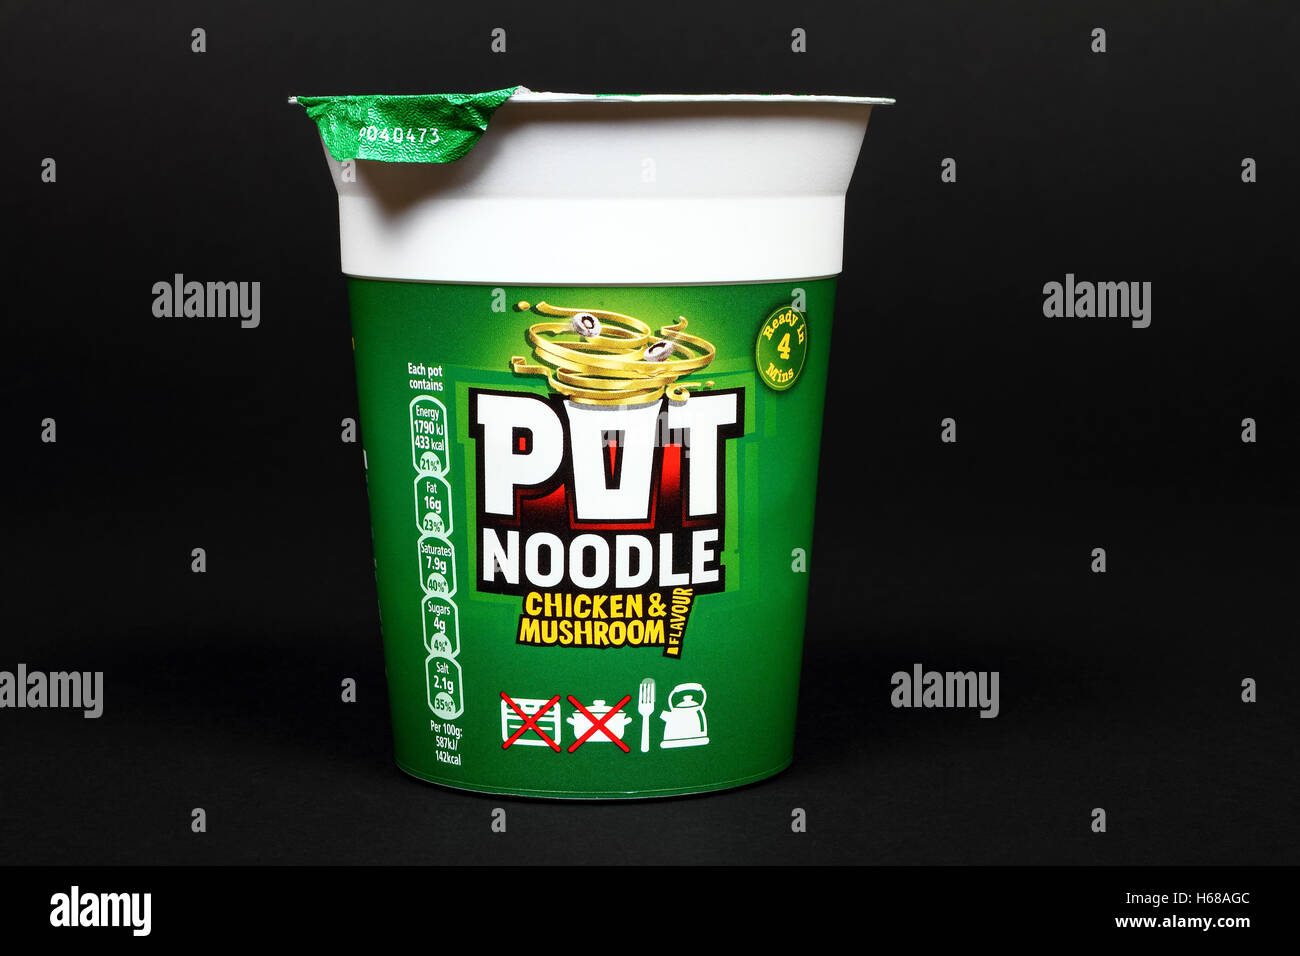 Golden wonder chicken and mushroom pot noodle isolated on a black background Stock Photo